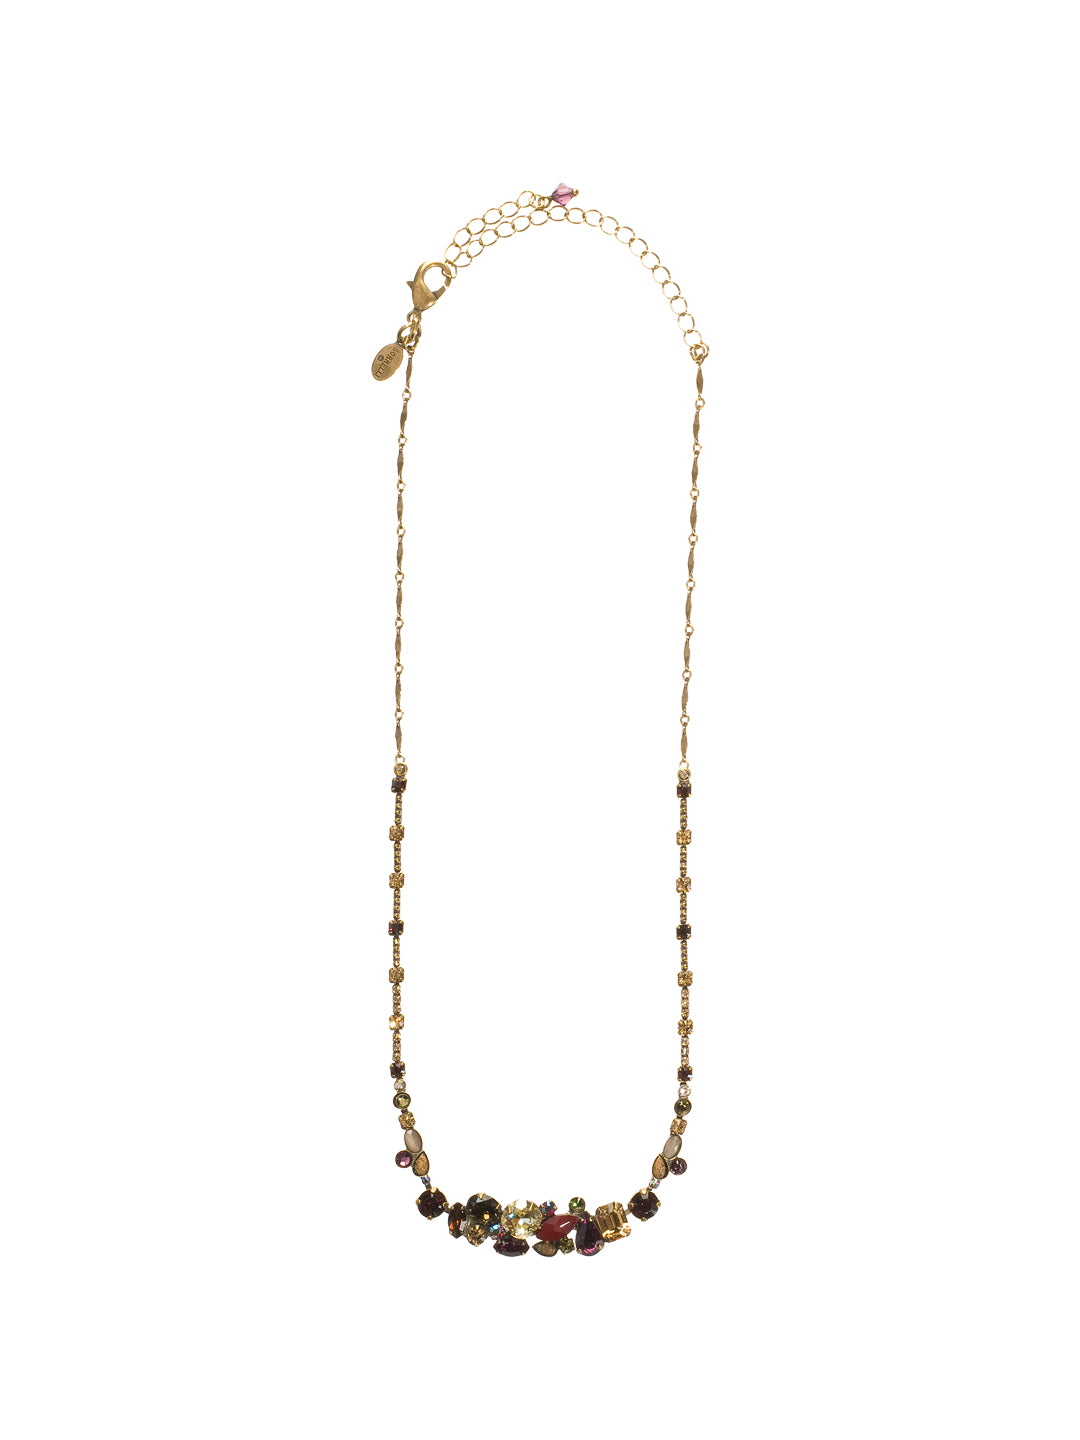 Simply Elegant Crystal Cluster Necklace Tennis Necklace - NCF26AGTAP - An elegant cluster of crystals is the central focus of this long-strand style. A bead-laden chain gives a bohemian, arts-and-crafts feel. From Sorrelli's Tapestry collection in our Antique Gold-tone finish.